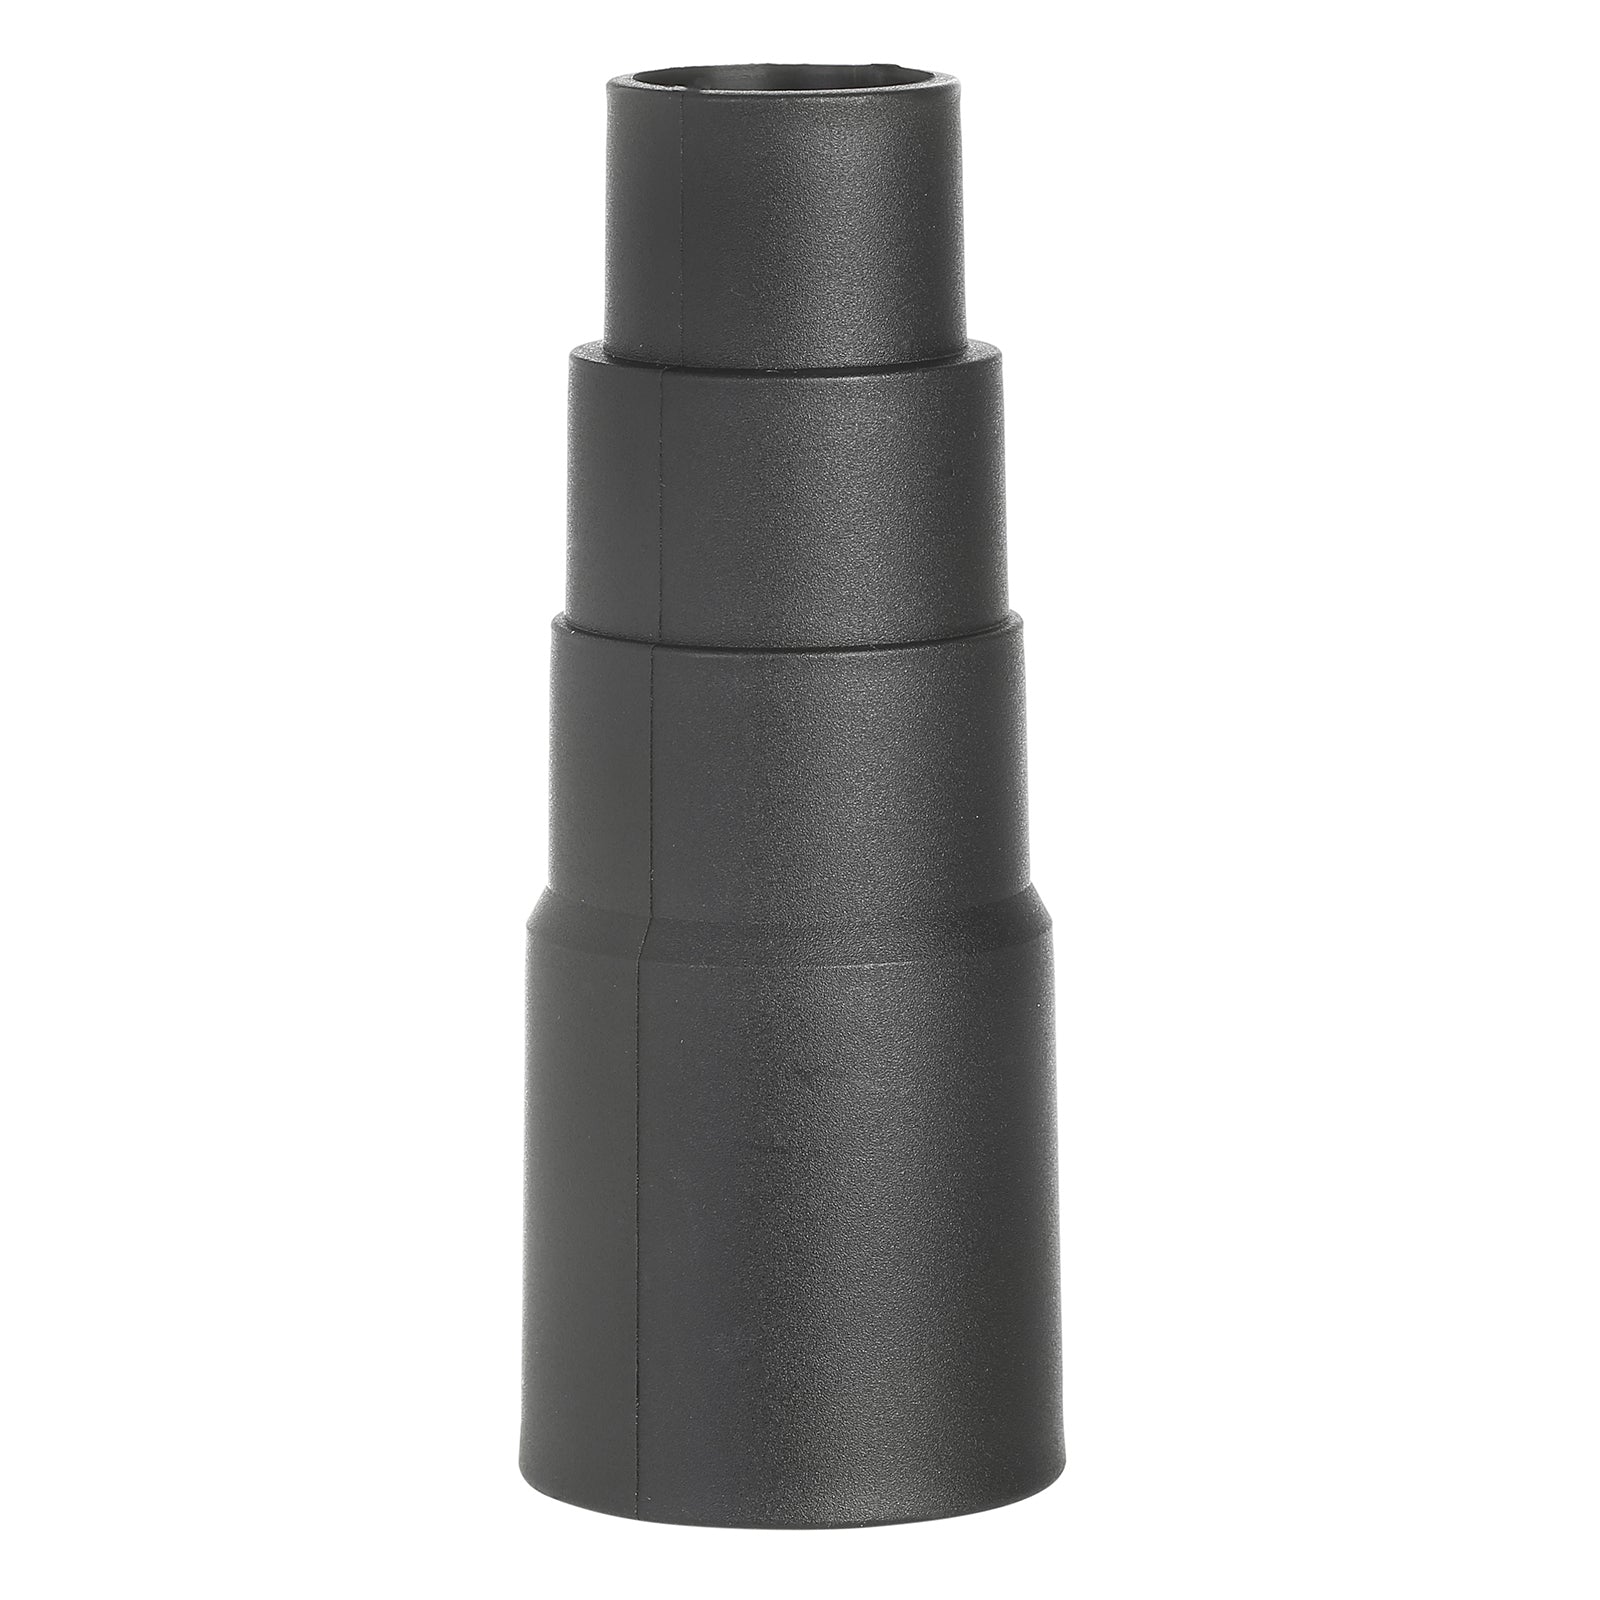 26mm to 41mm tool adaptor